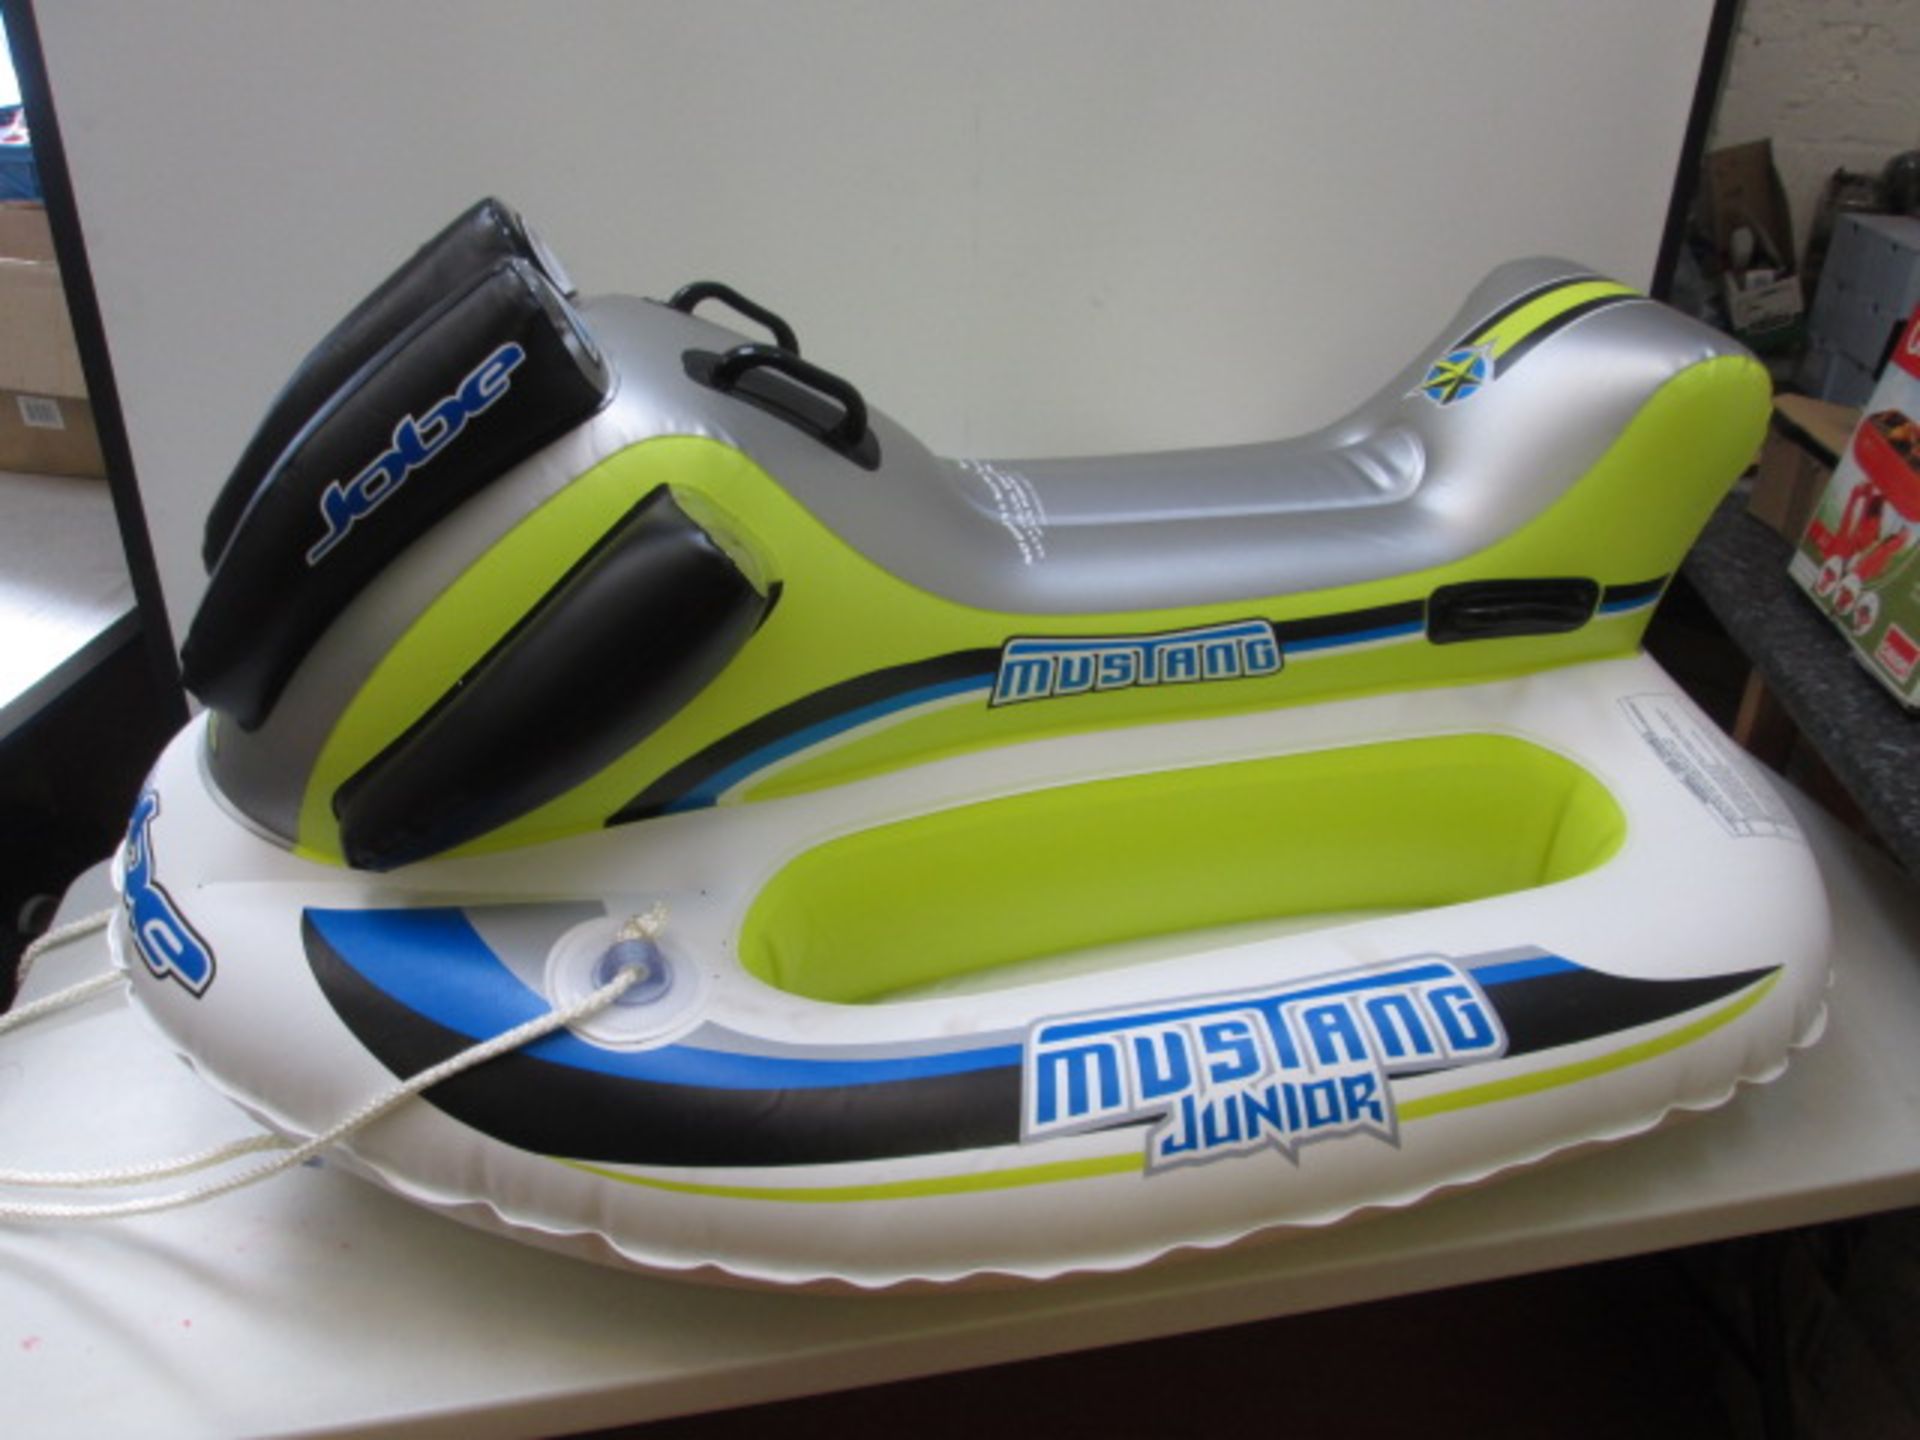 Jobe Mustang Junior Inflatable Childs Jetski, Max Capacity 120lbs (54kg). Comes with Hand Pump &